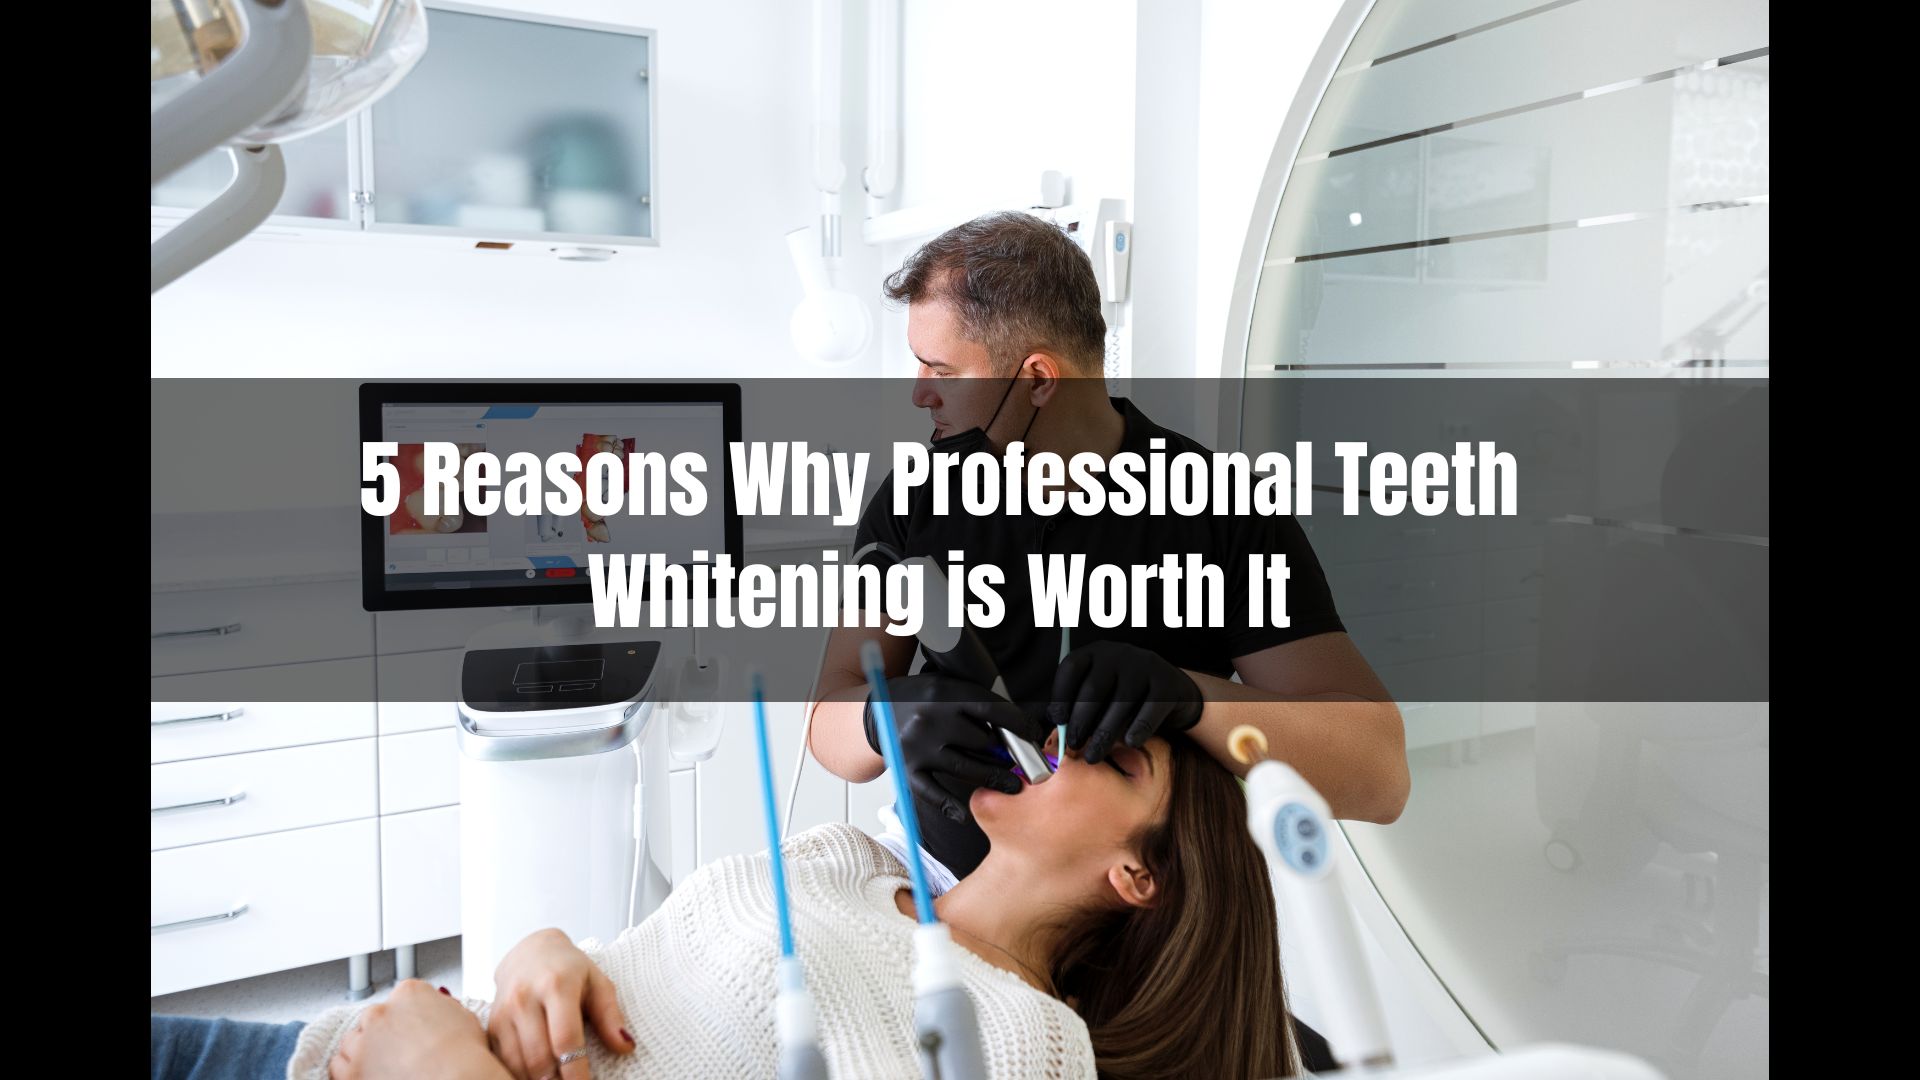 5 Reasons Why Professional Teeth Whitening is Worth It